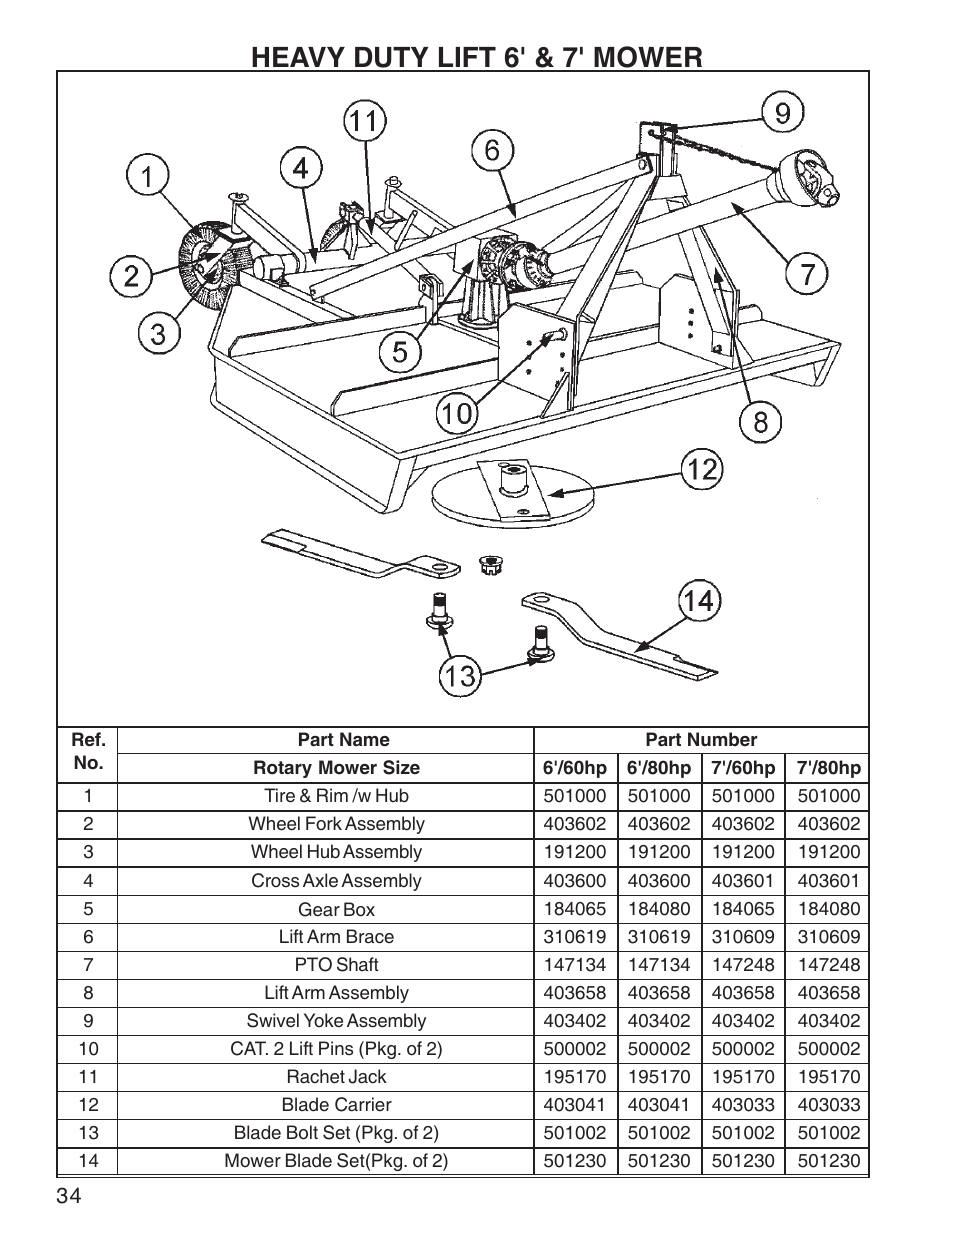 Heavy duty lift 6' & 7' mower | King Kutter Rotary Mower User Manual | Page 34 / 46